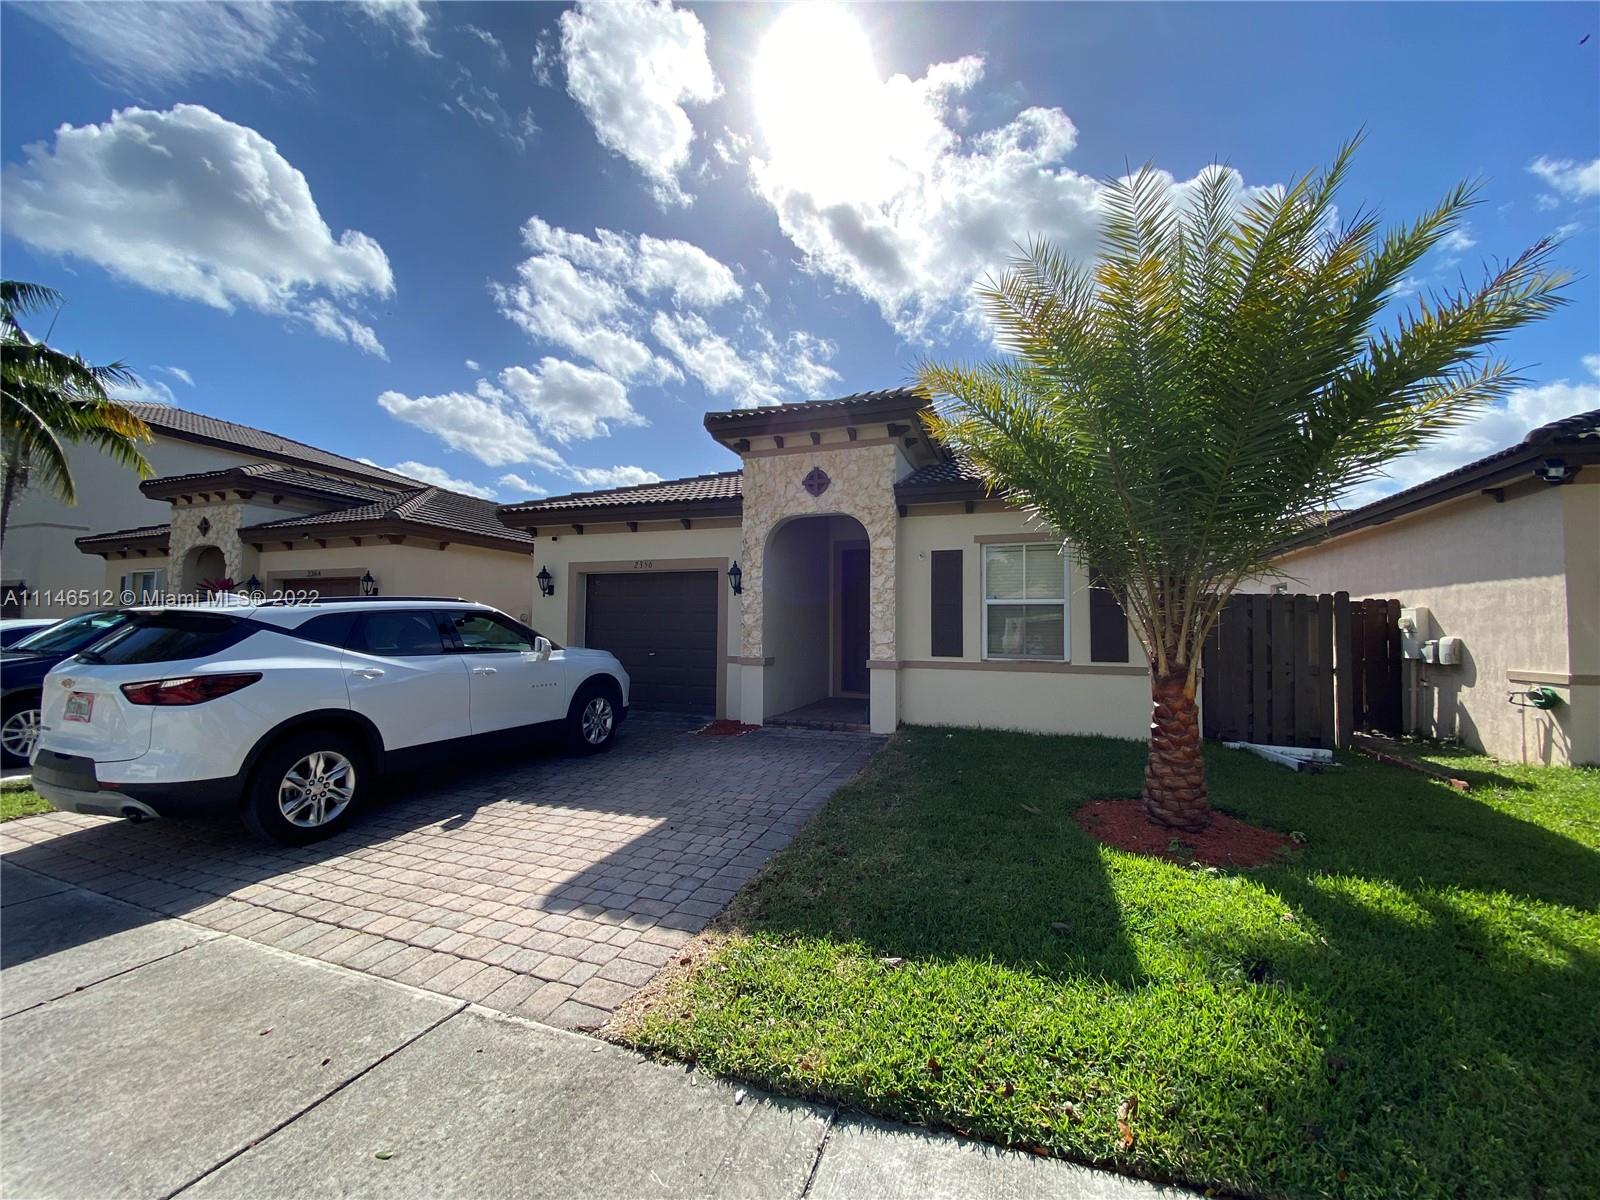 California style single family home for rent at Atlantis at Oasis with lake view. The features include a bright open split bedroom with living, dinning and family room area. Across from park with playground for kids. The amenities include pool, gym, social room and more.